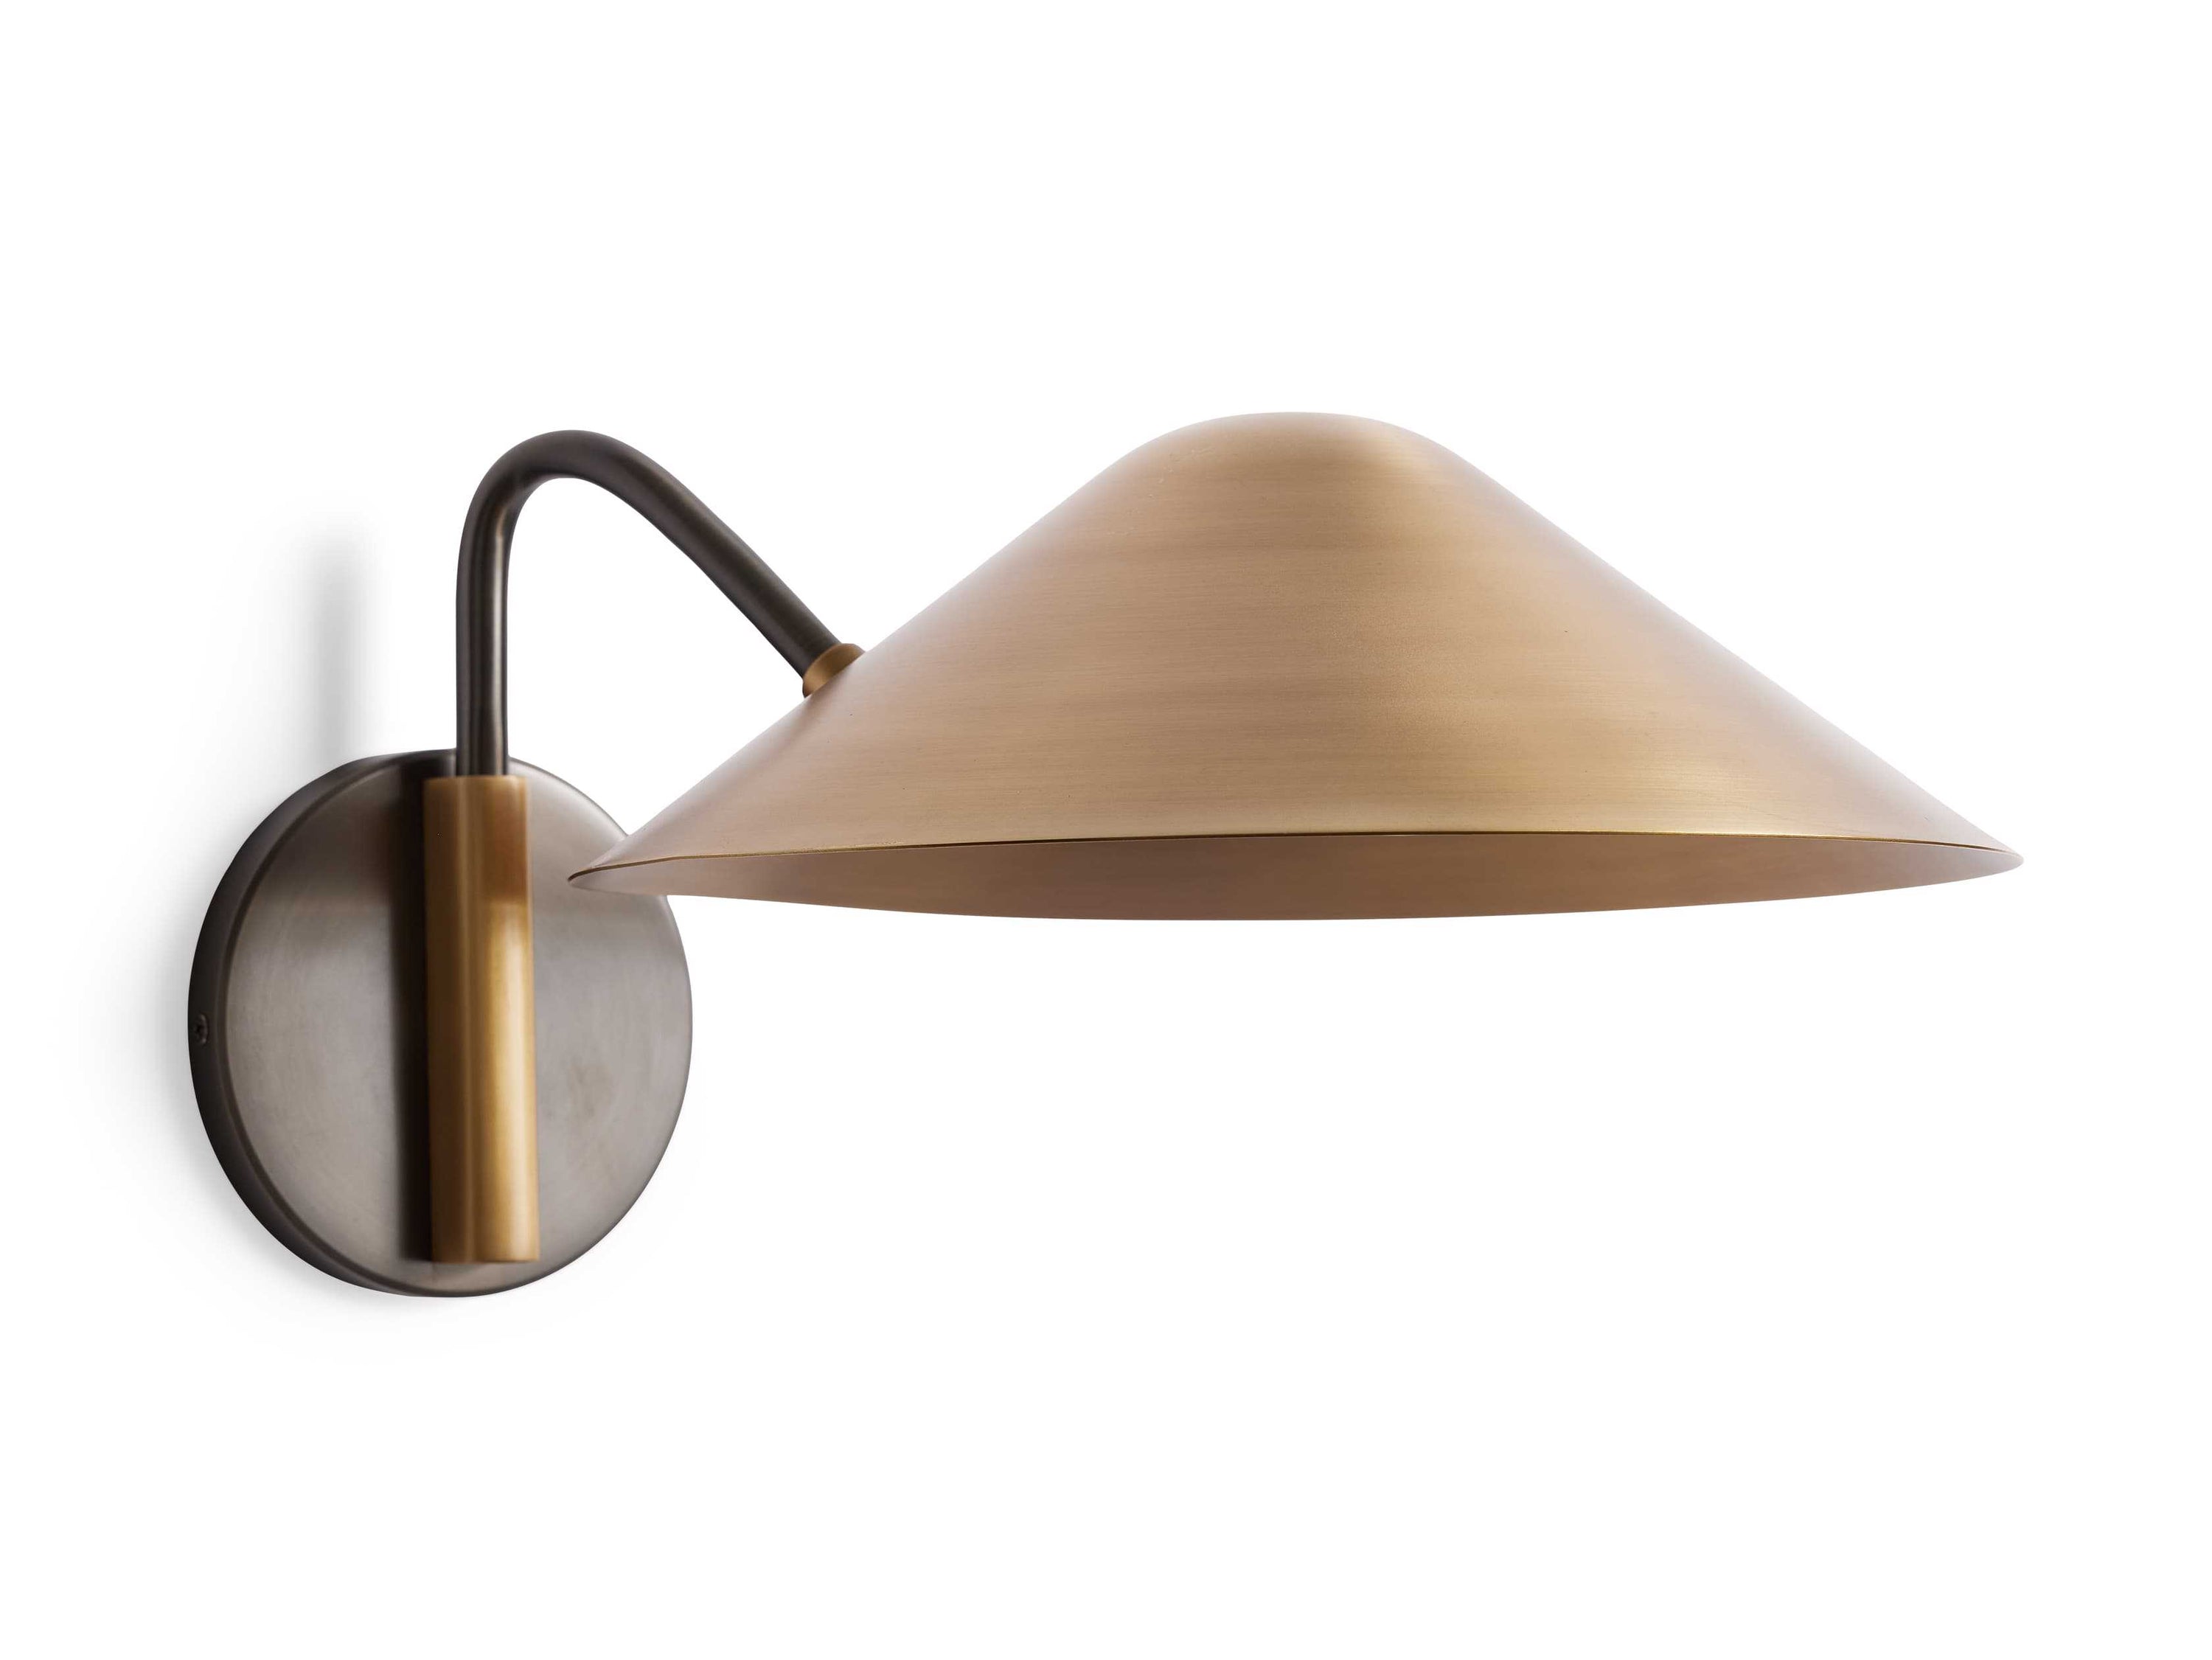 Simms Wall Sconce